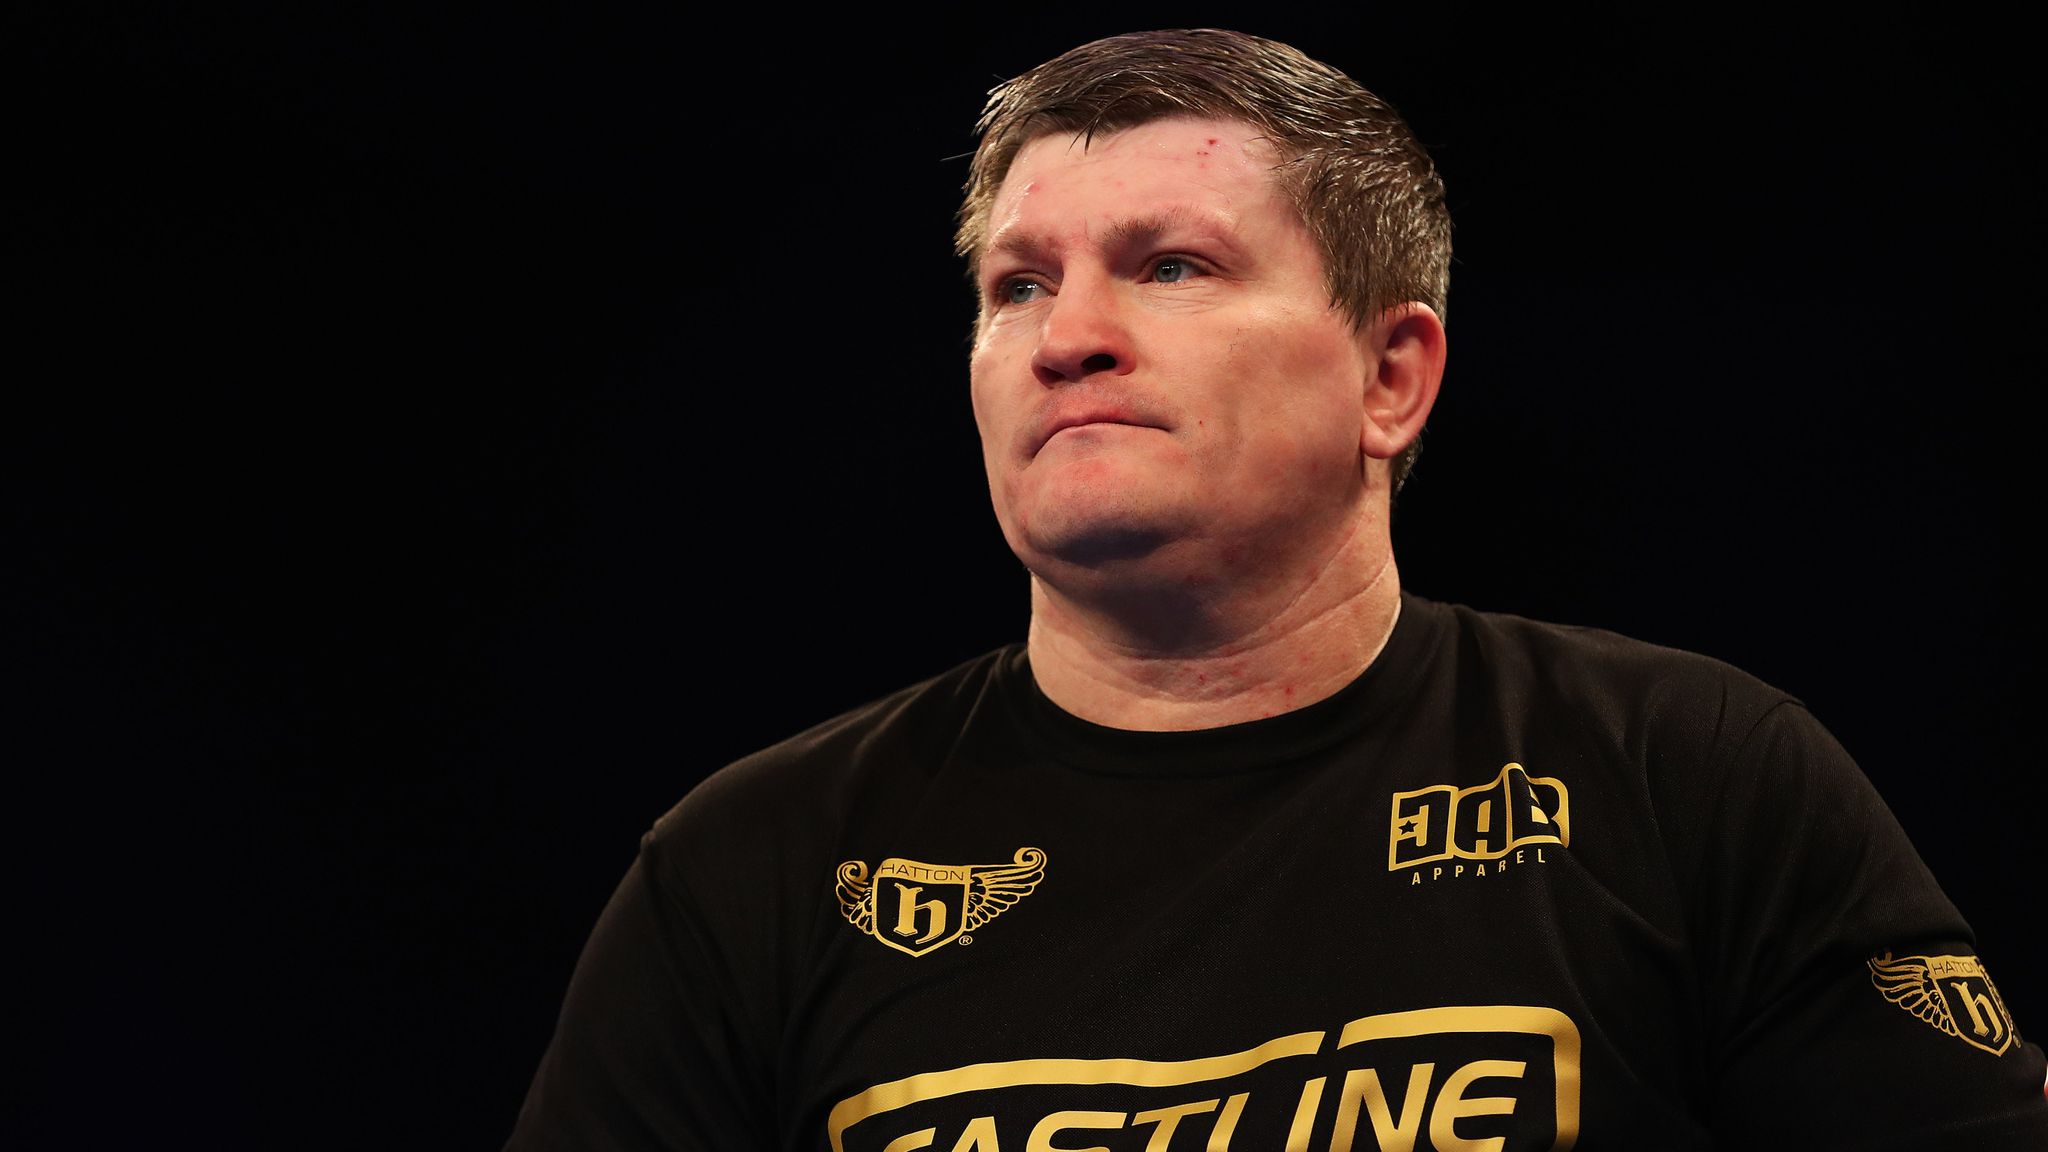 Ricky Hatton Former world champion in talks over comeback fight against Marco Antonio Barrera at the age of 43 Boxing News Sky Sports